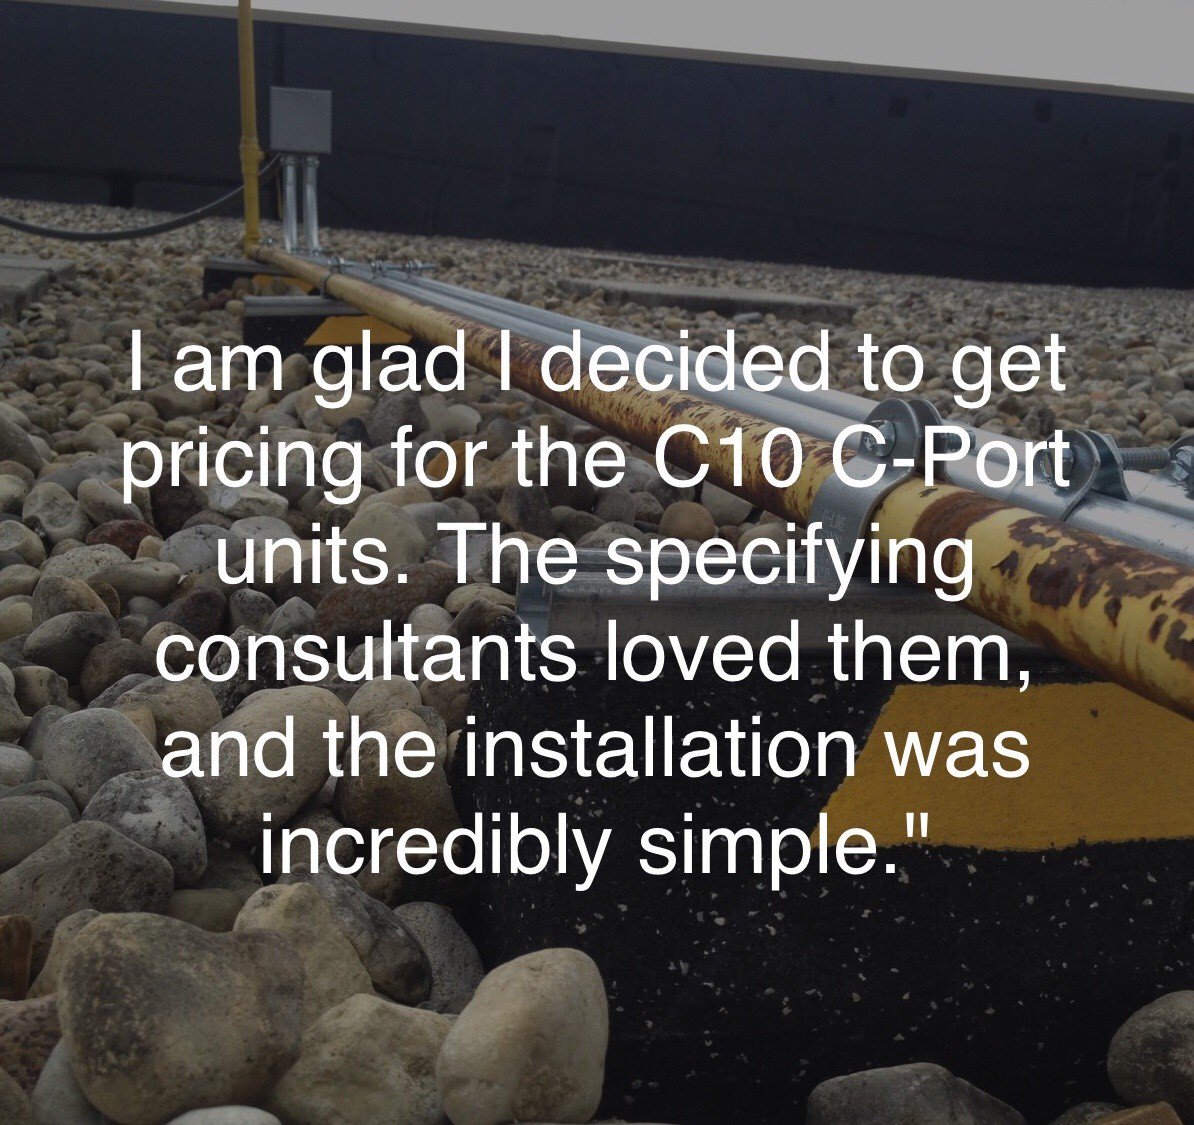 Customer feedback is very important to us!

#PipeSupport #electrician #Plumber #HVAC #Solar #Mechanical #Engineer #Architect #PipeHanger #Testimonial #Customer #BlachandYellow #conduit #Gasline #Ductwork #Plumbing #Electrical #Eco #Greenproduct #CPort #Commercial #Trades